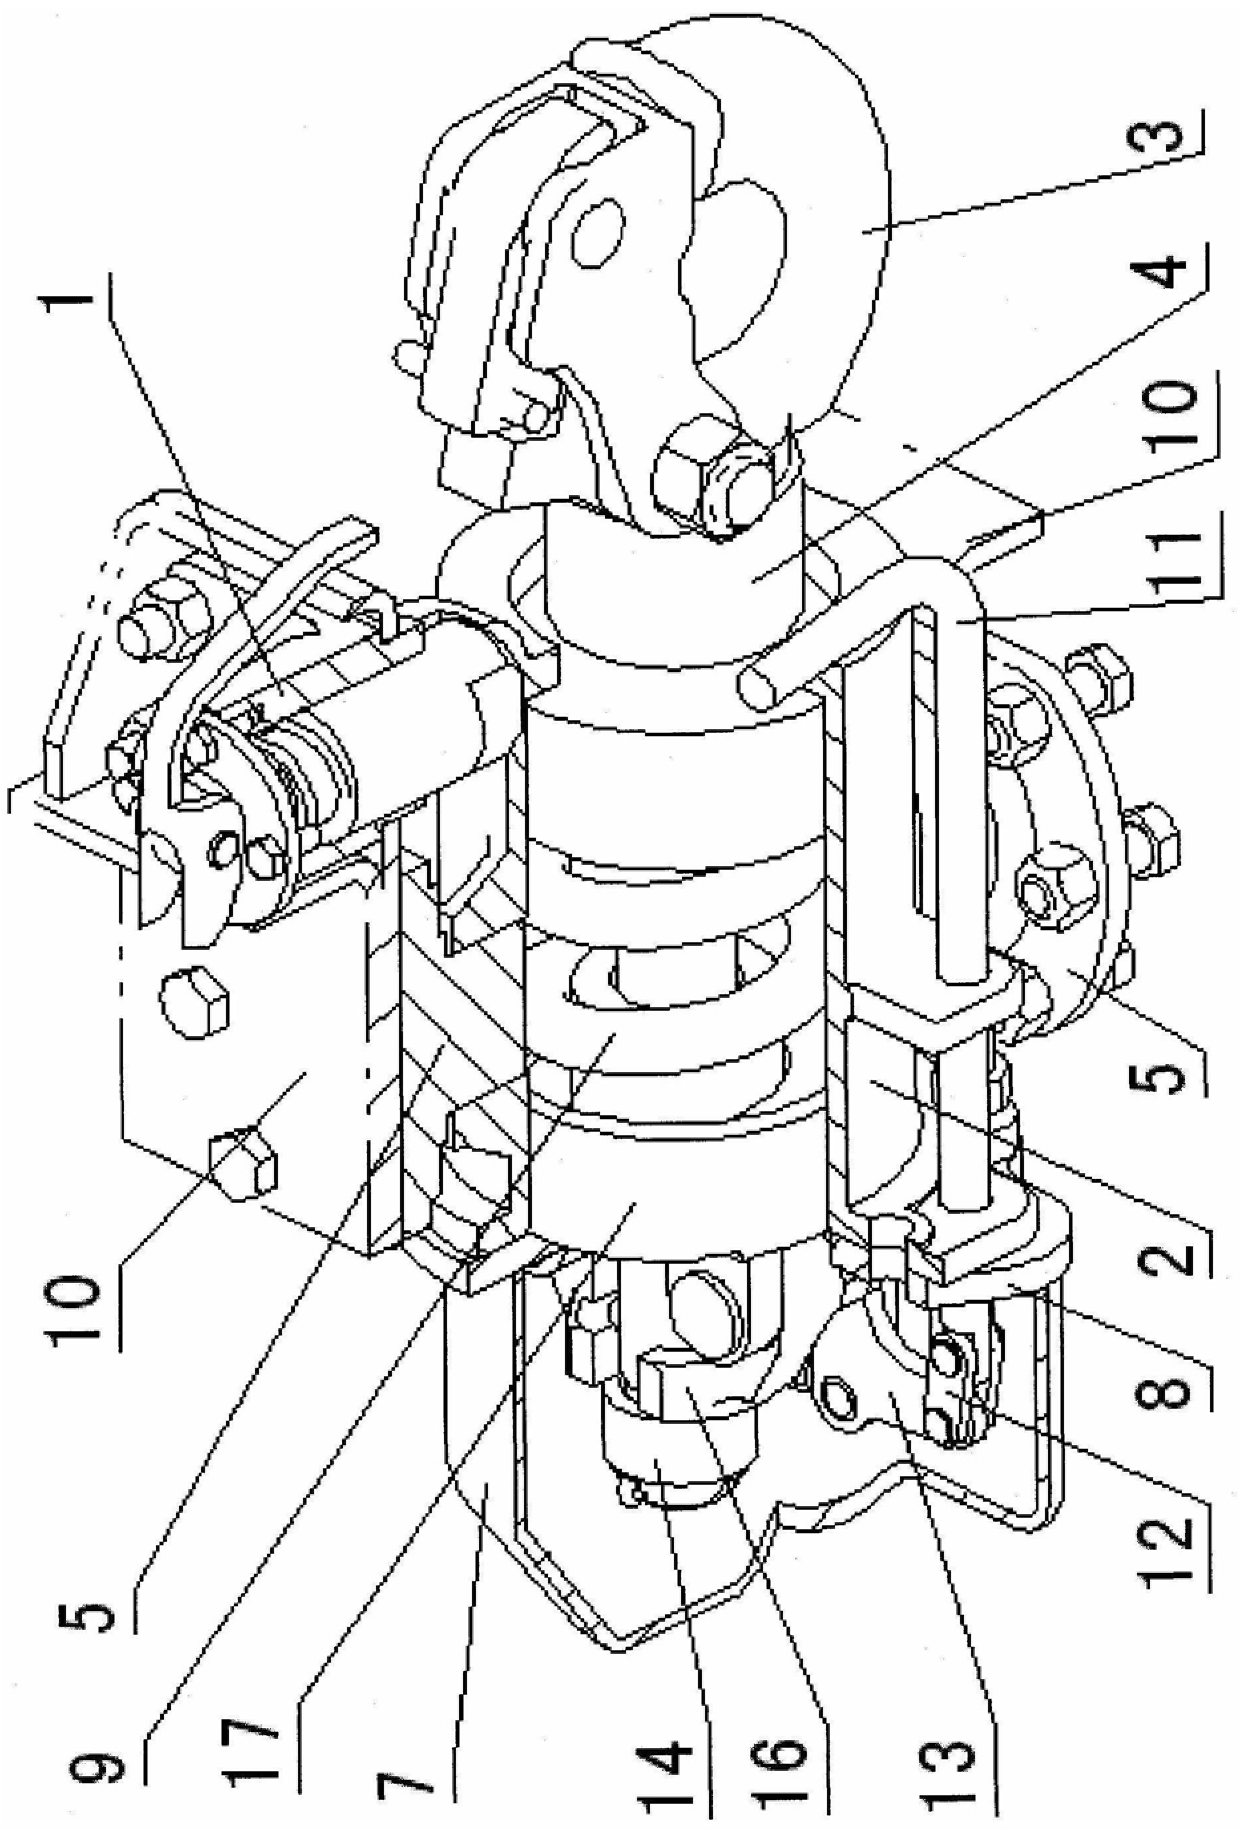 Multi-degree-of-freedom traction device